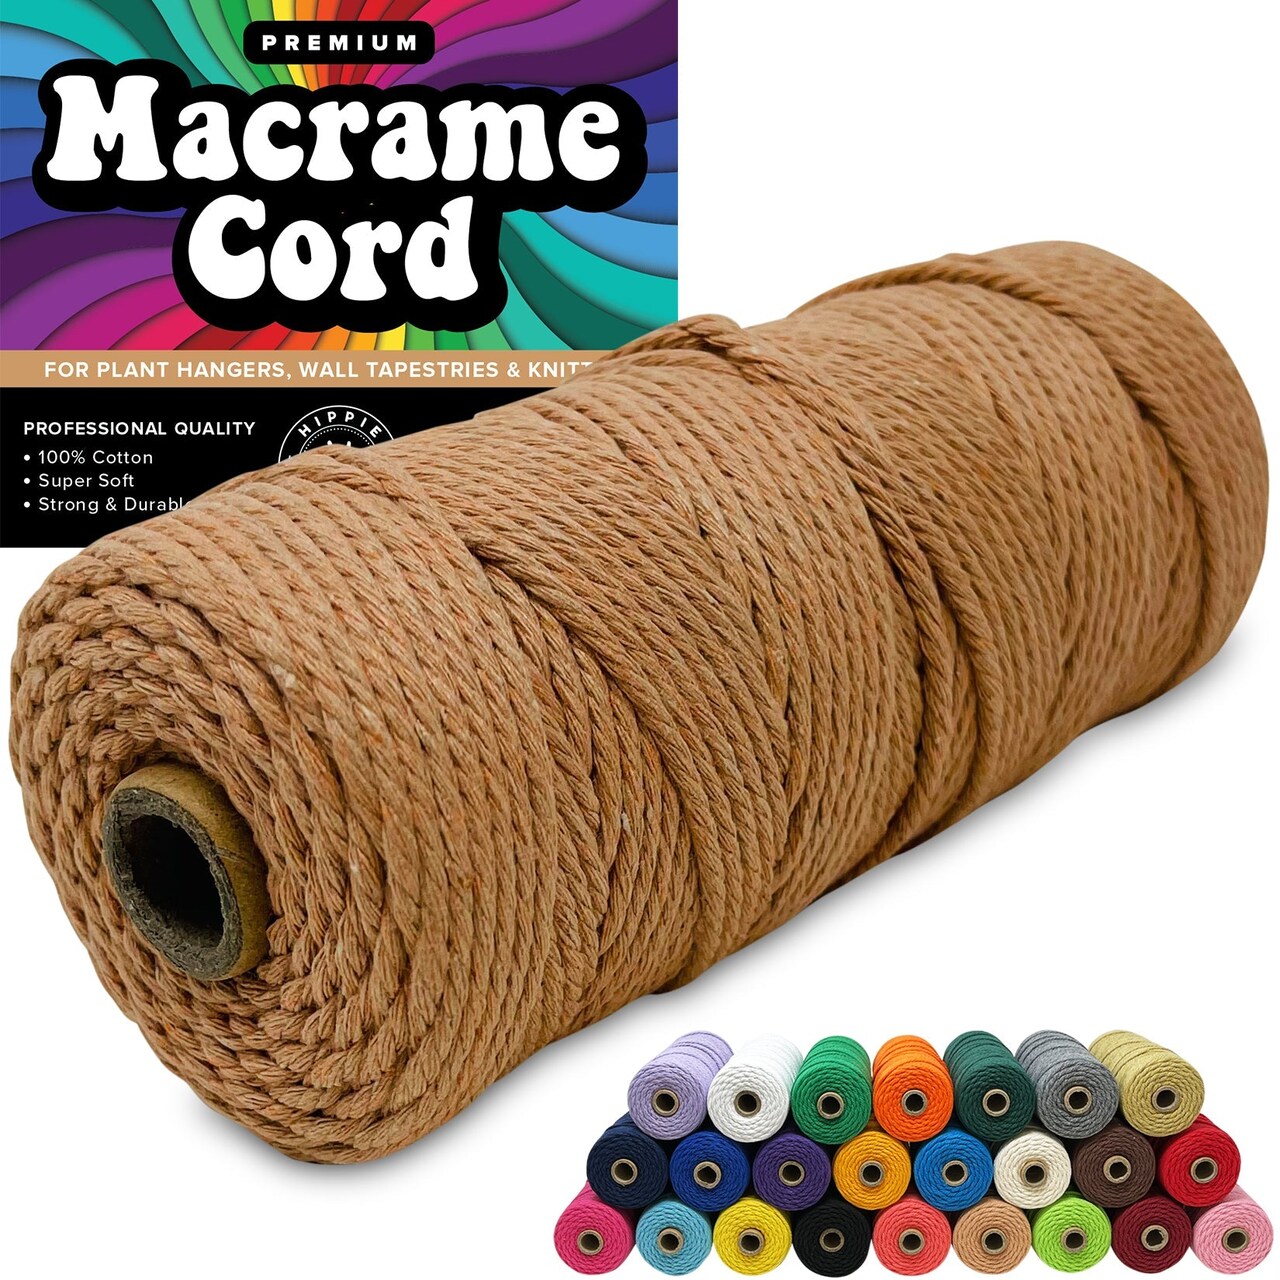 3mm Macrame Cord 3mm Thick Cords for Macrame Yarn 100% Cotton Colored  Macrame Rope Cord Natural Craft Cord String Yarn Supplies 325 Feet 3 mm  Cotton Macrame Cord Thin Macrame Supplies